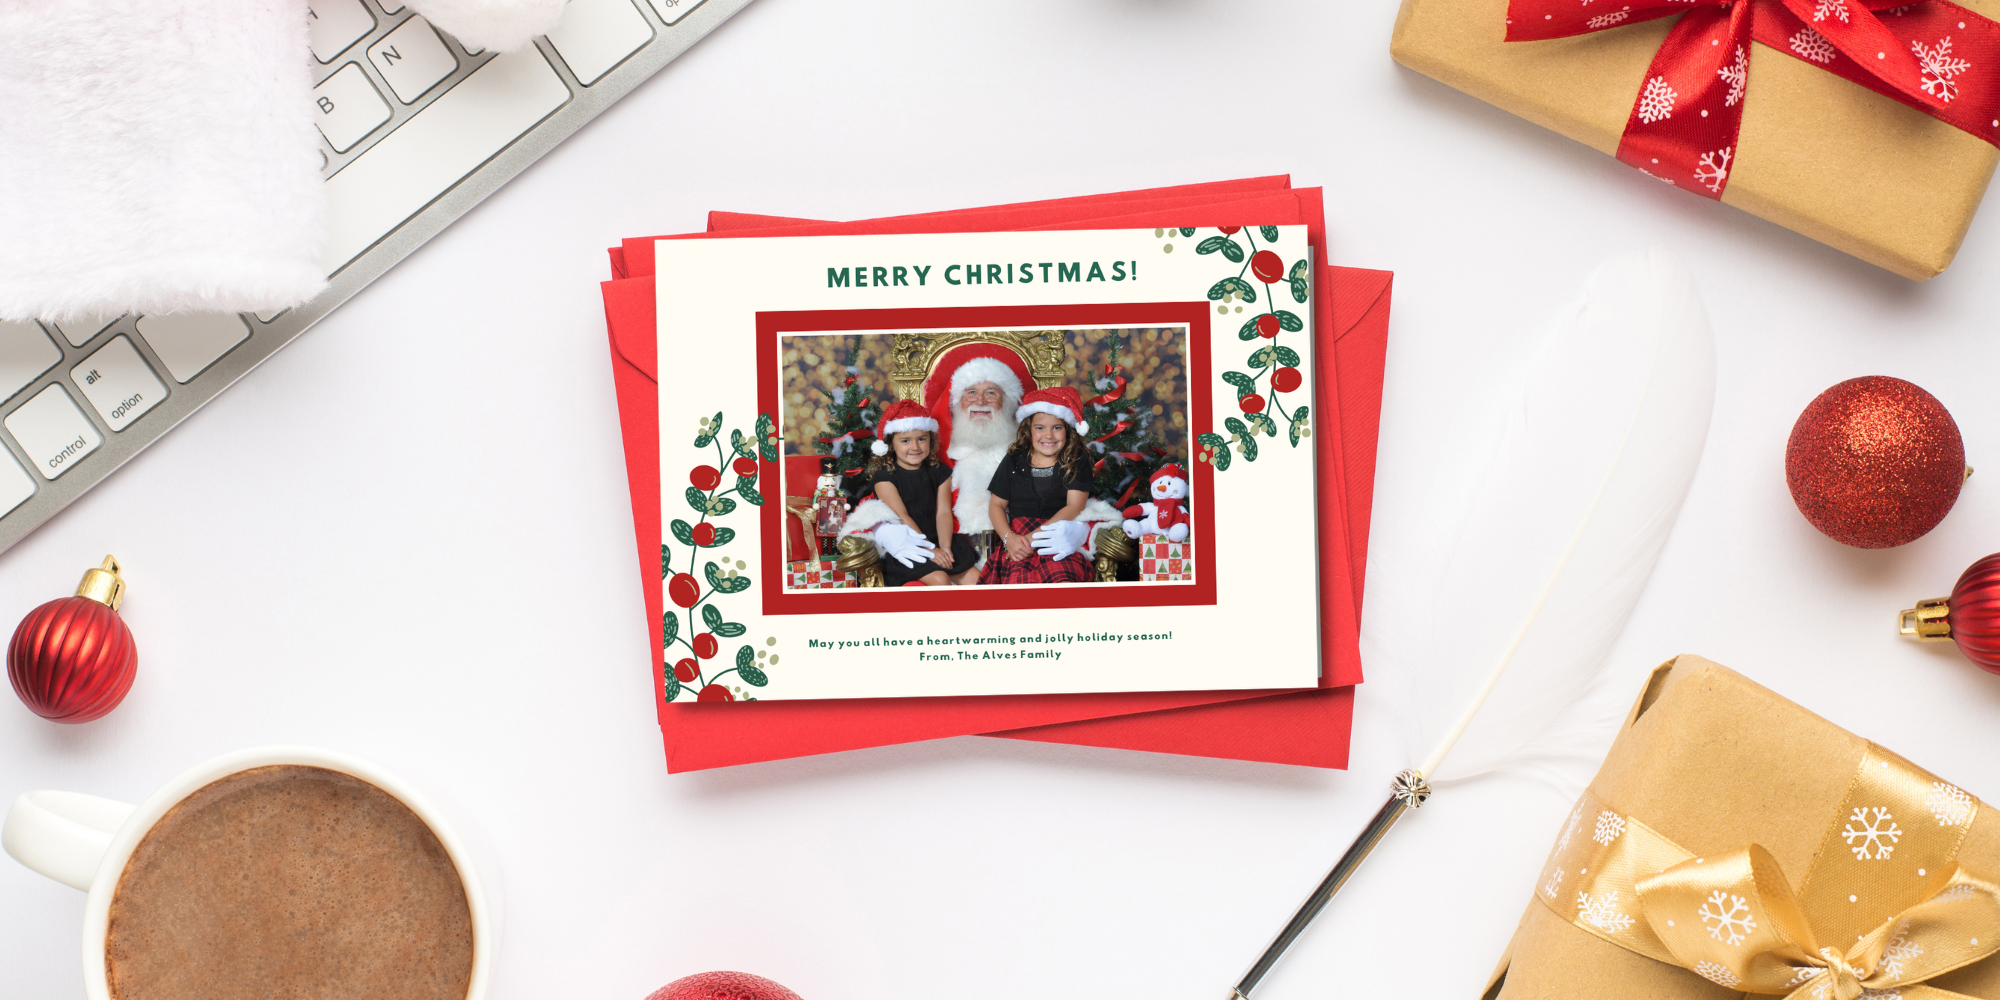 custom christmas cards with Santa visit photos on a desk with holiday presents and a computer keyboard